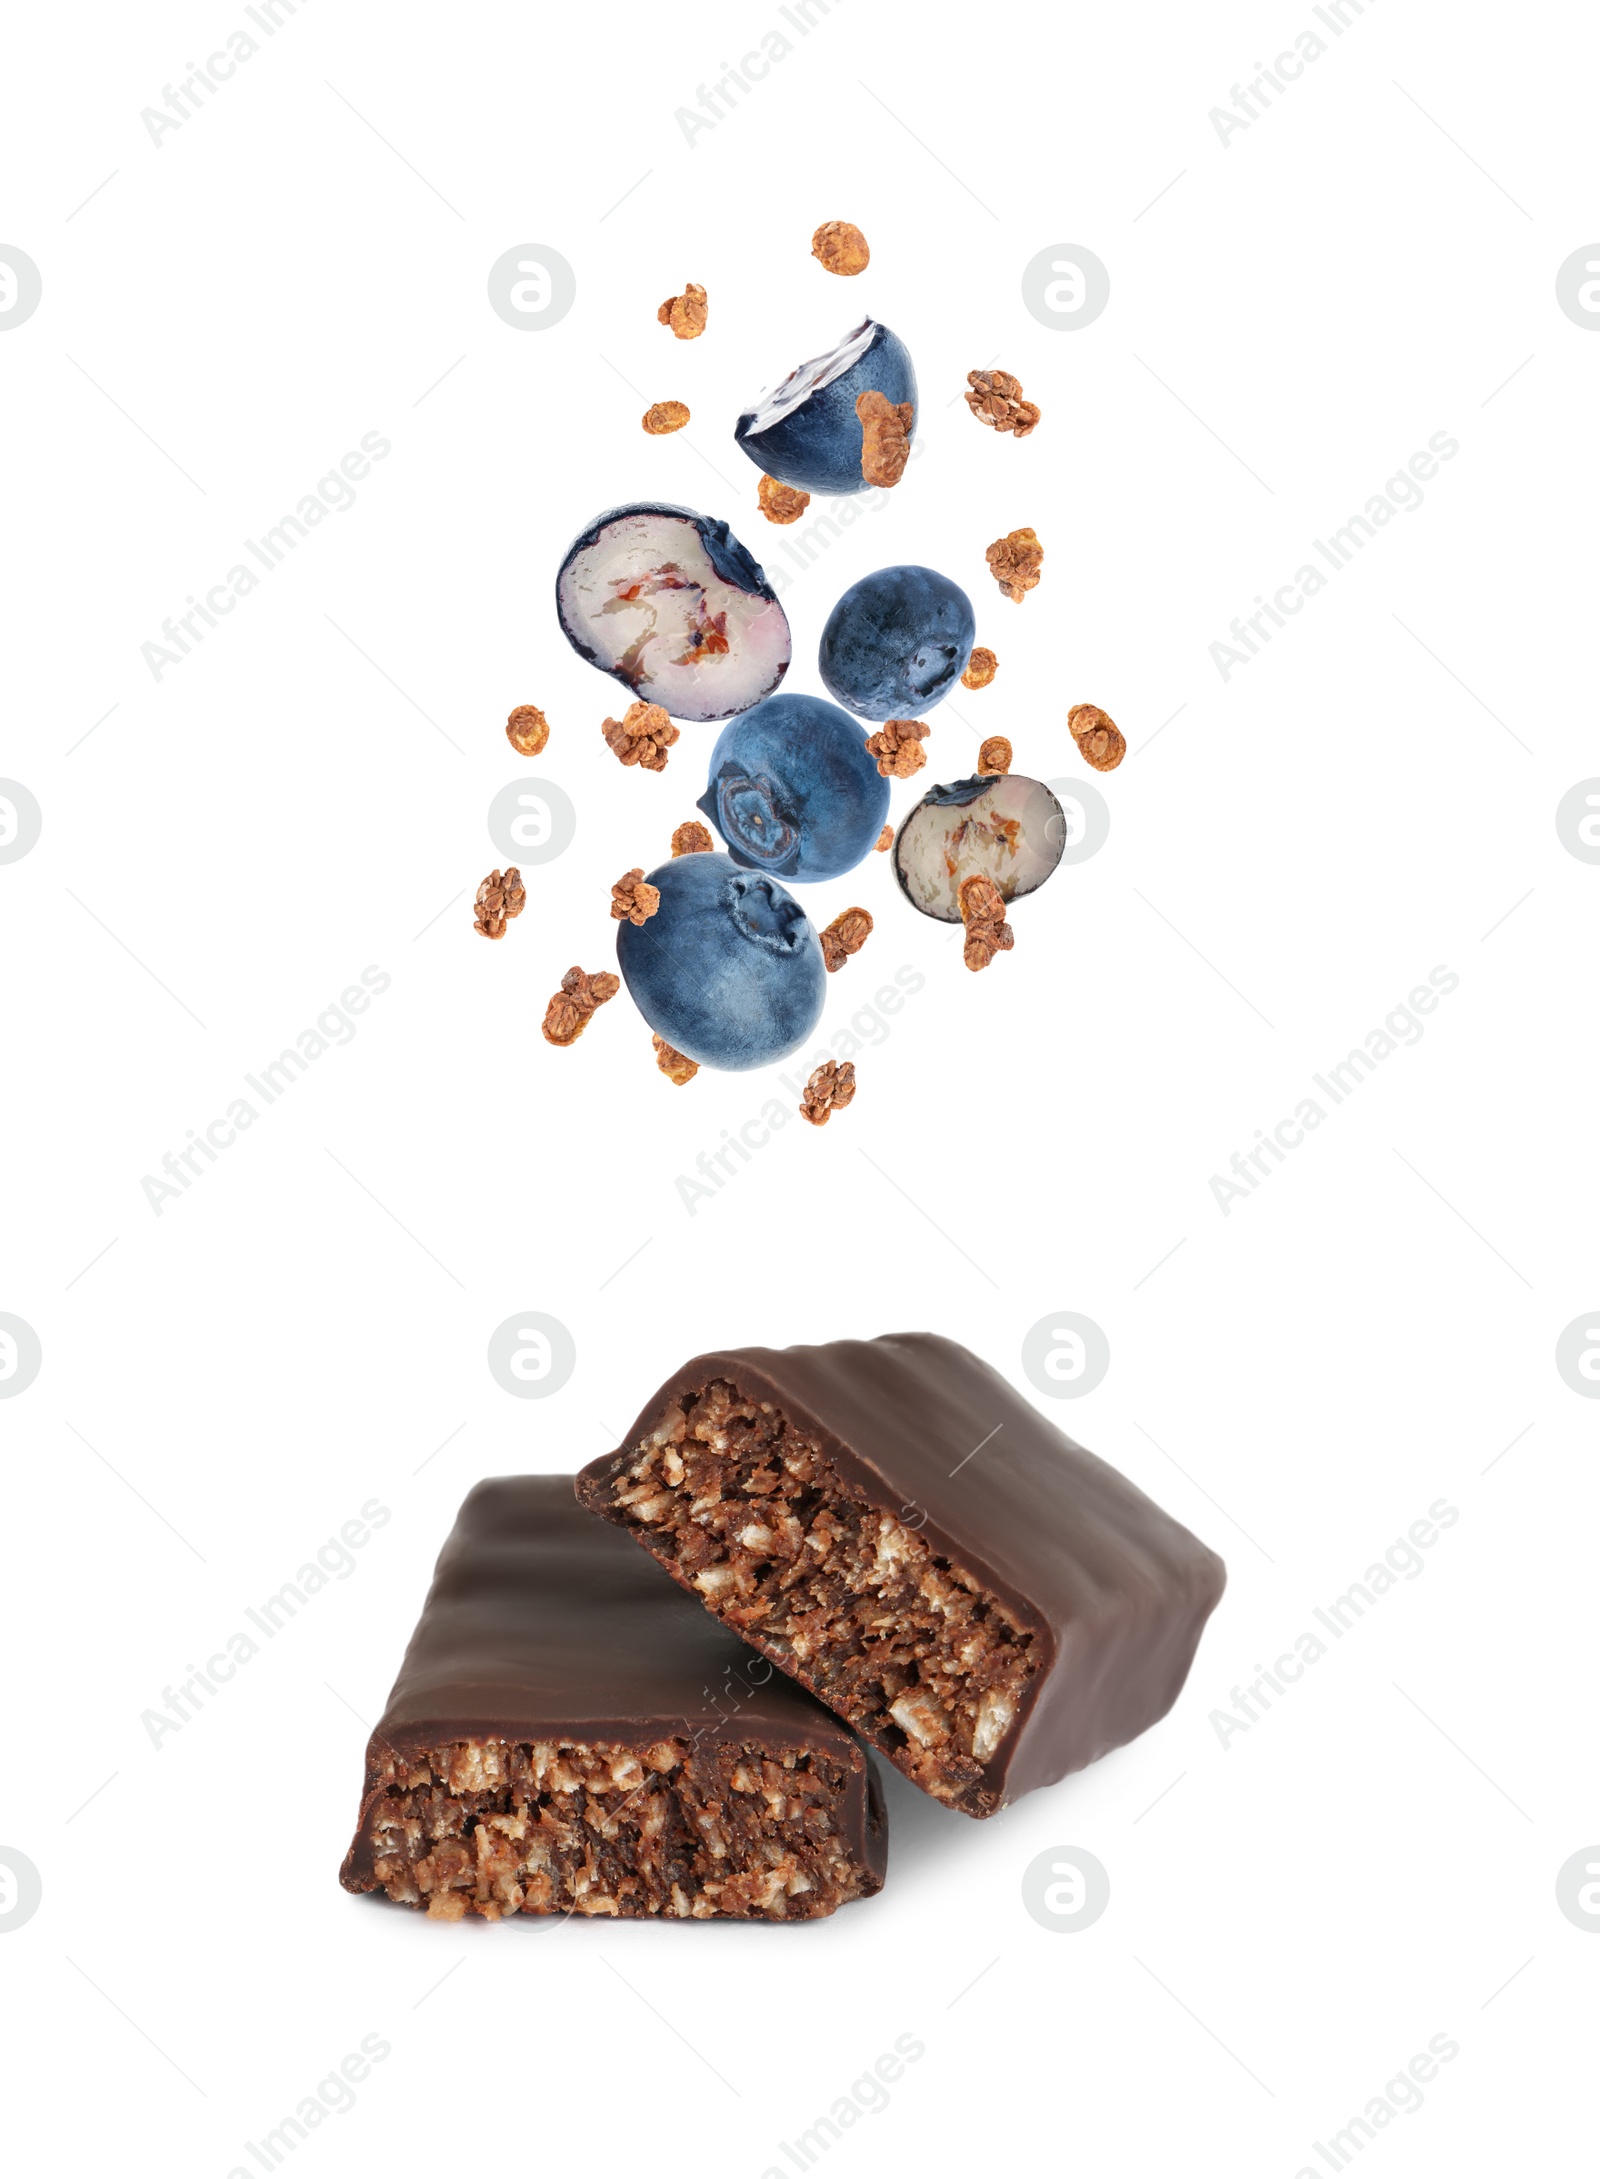 Image of Tasty chocolate glazed protein bars and granola with blueberries falling on white background